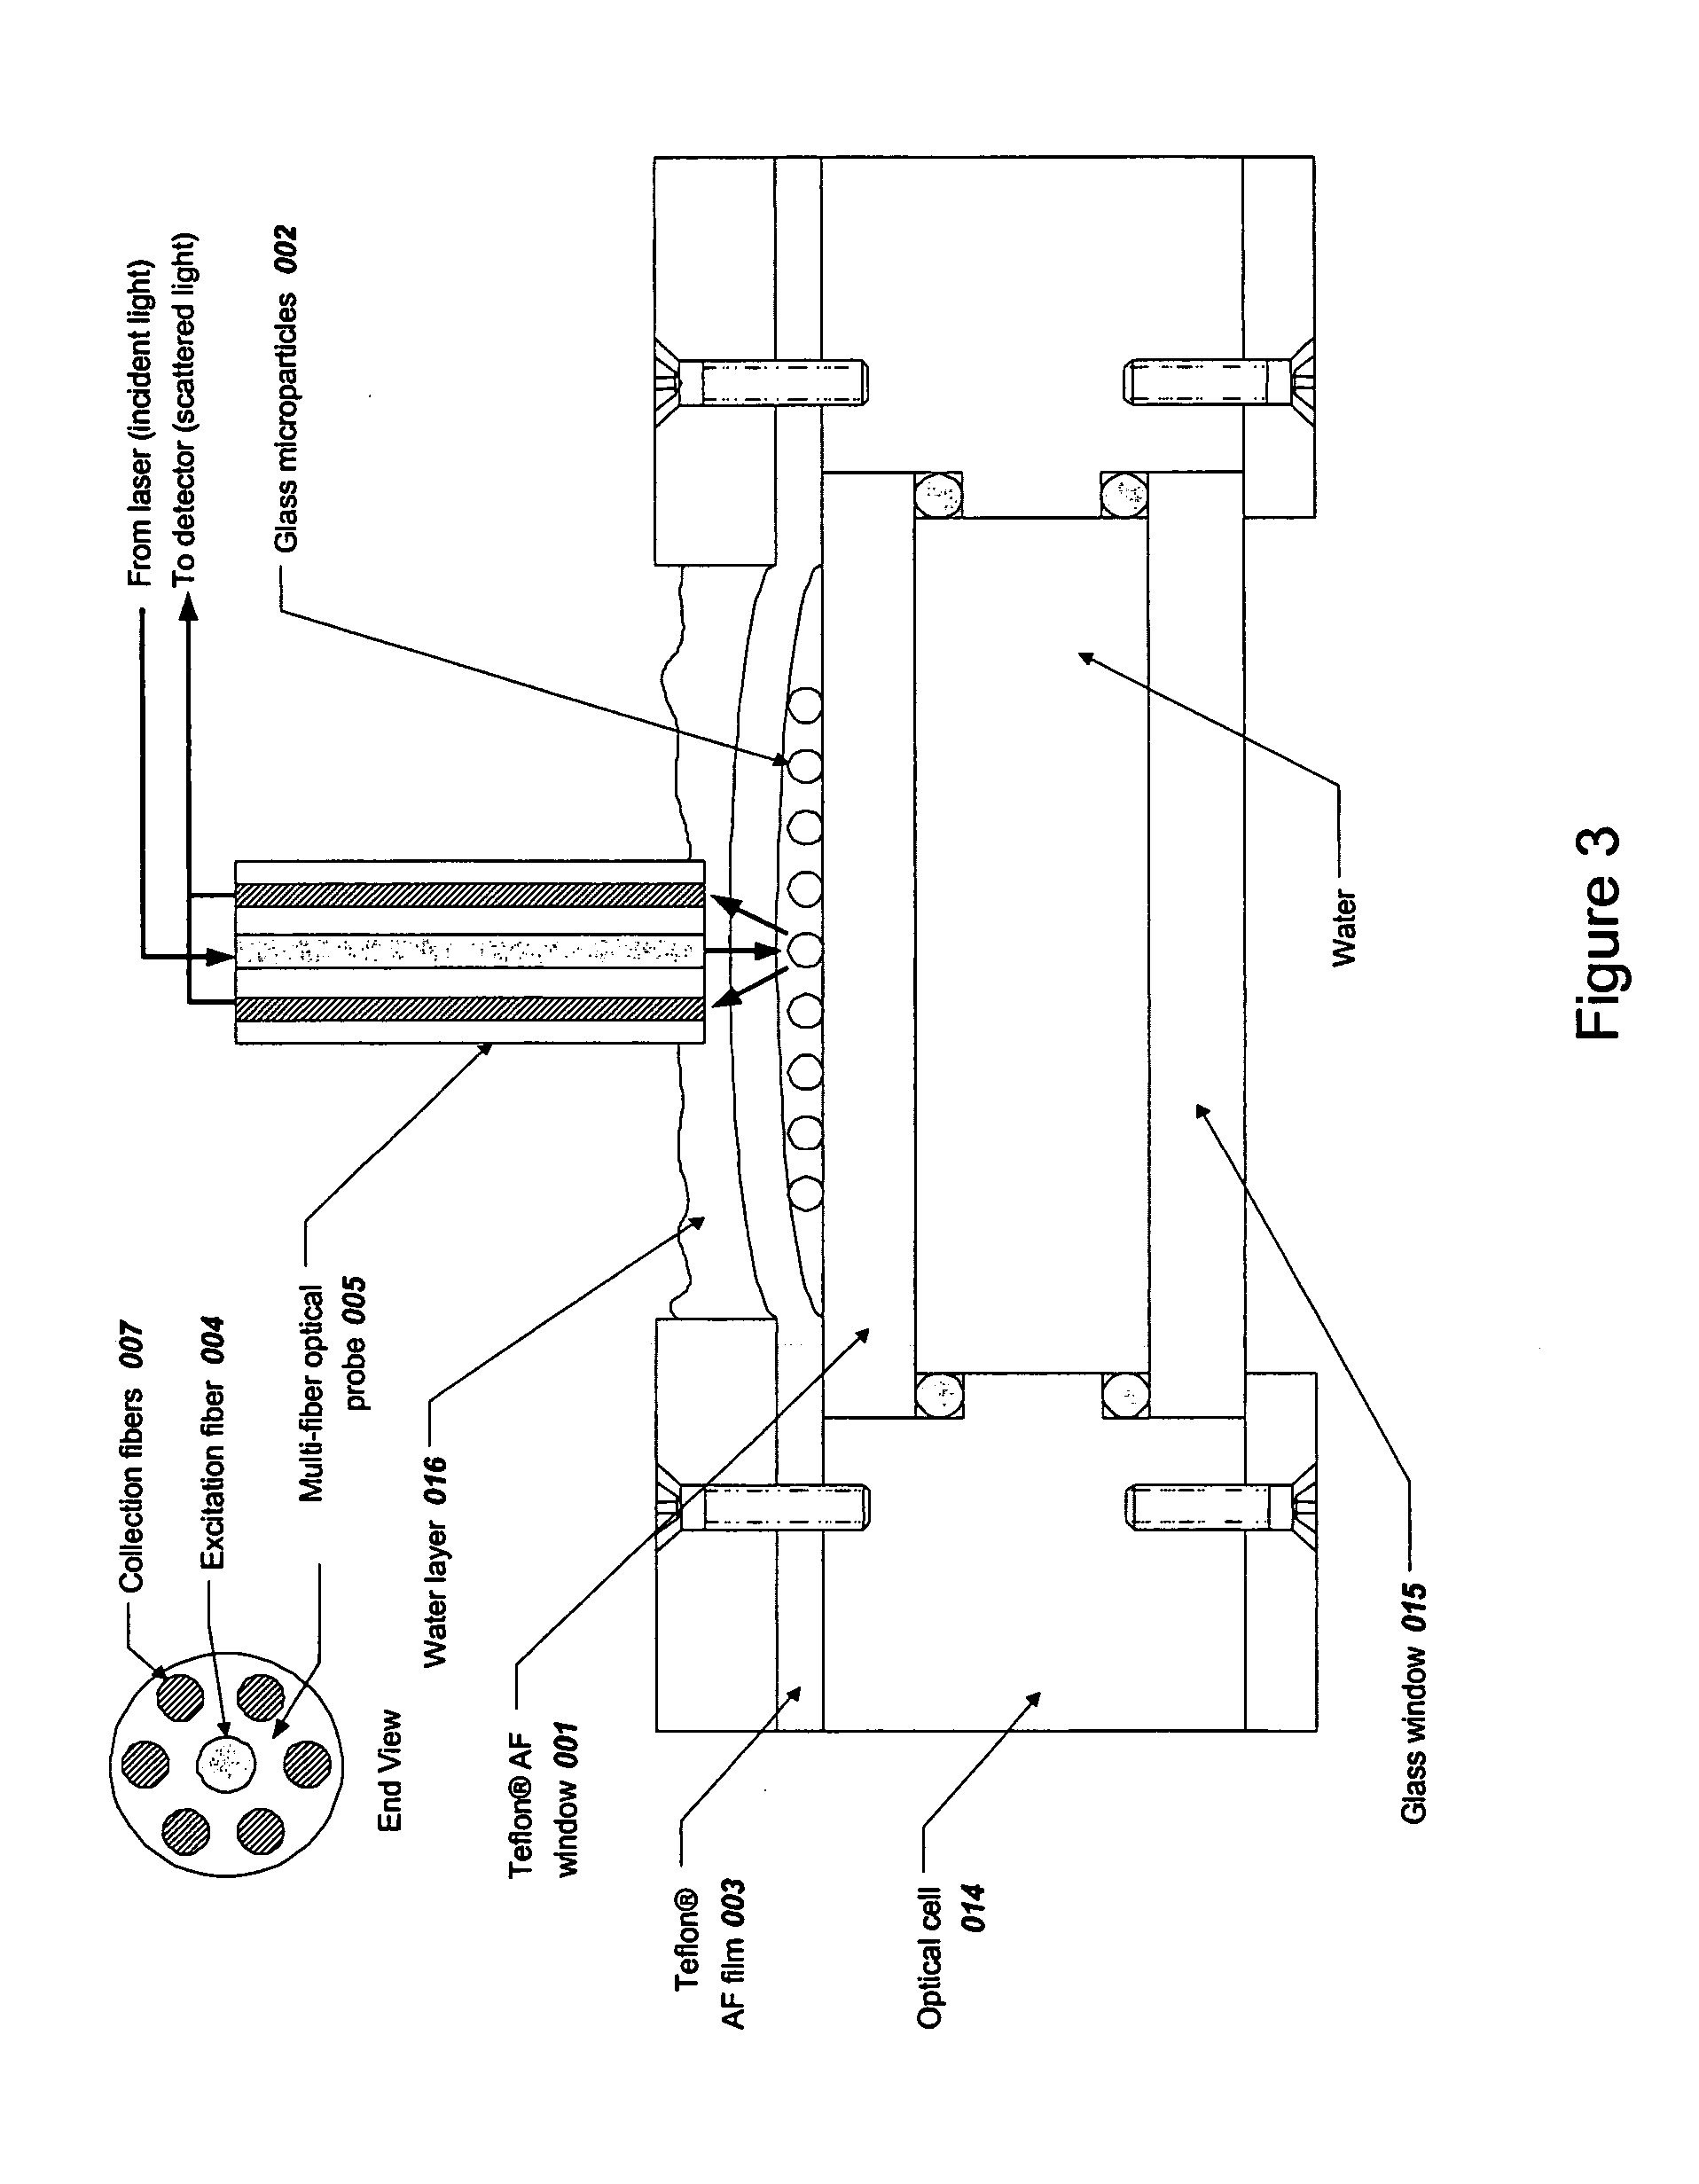 Microparticle-based methods and systems and applications thereof